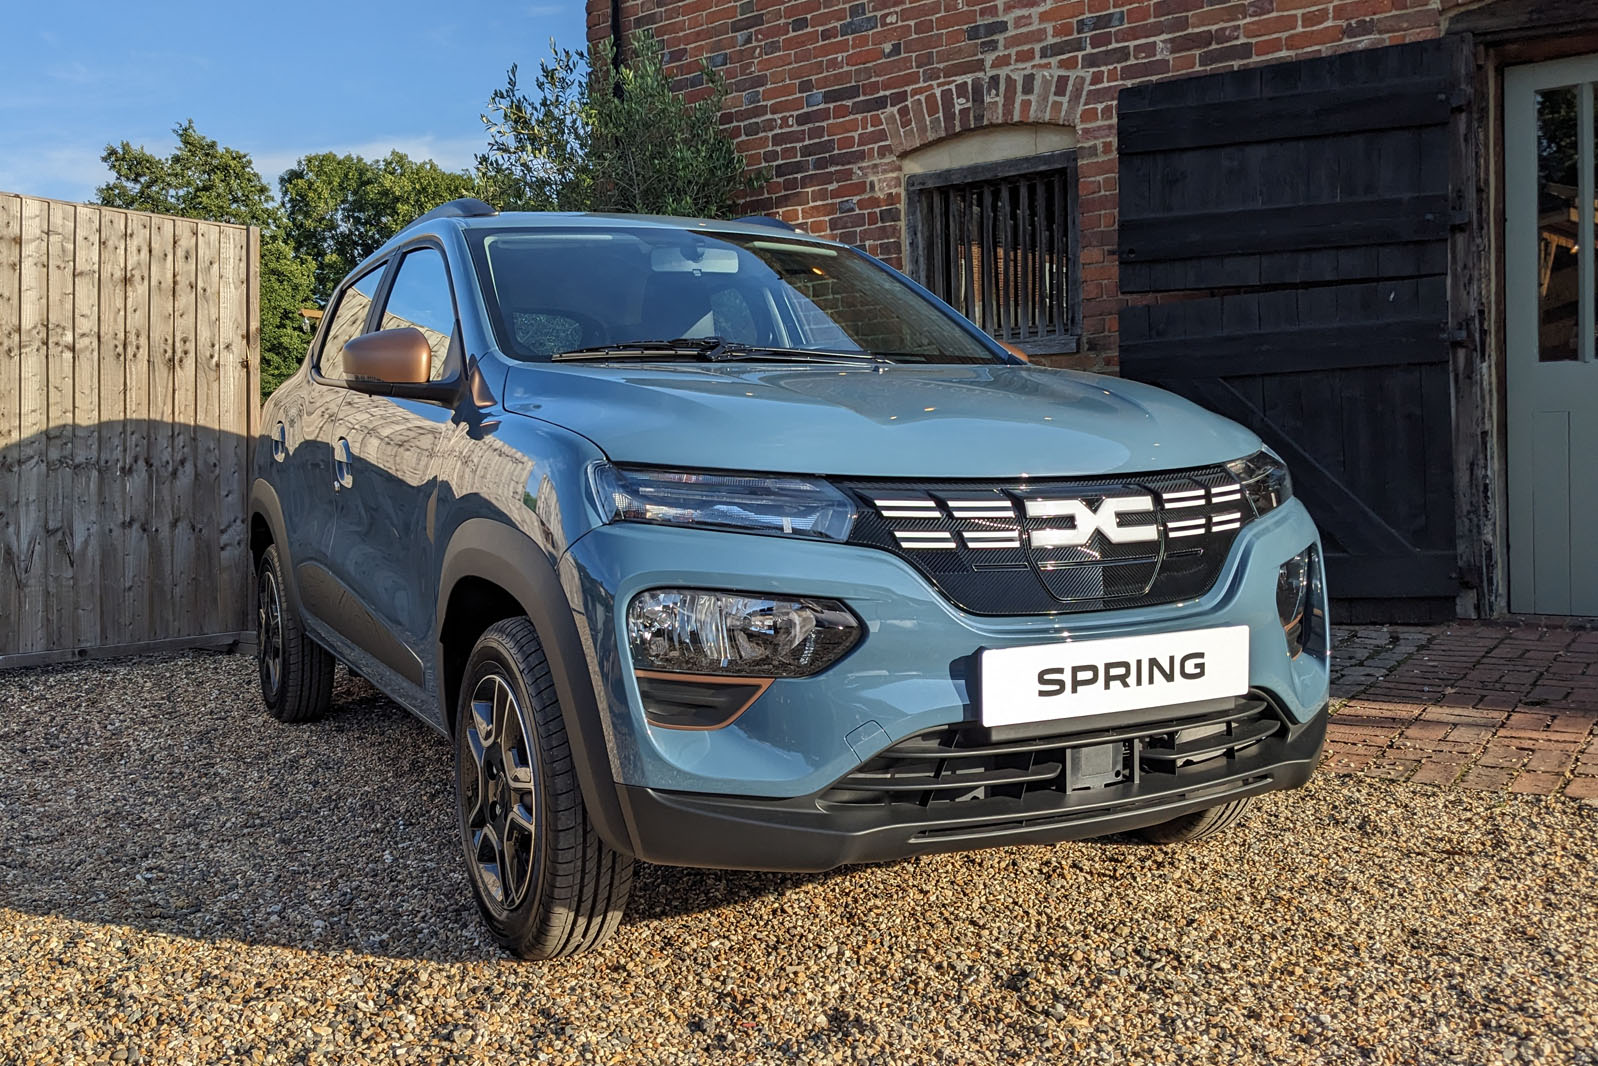 ALL-NEW DACIA SPRING: The electric revolution, exclusively for